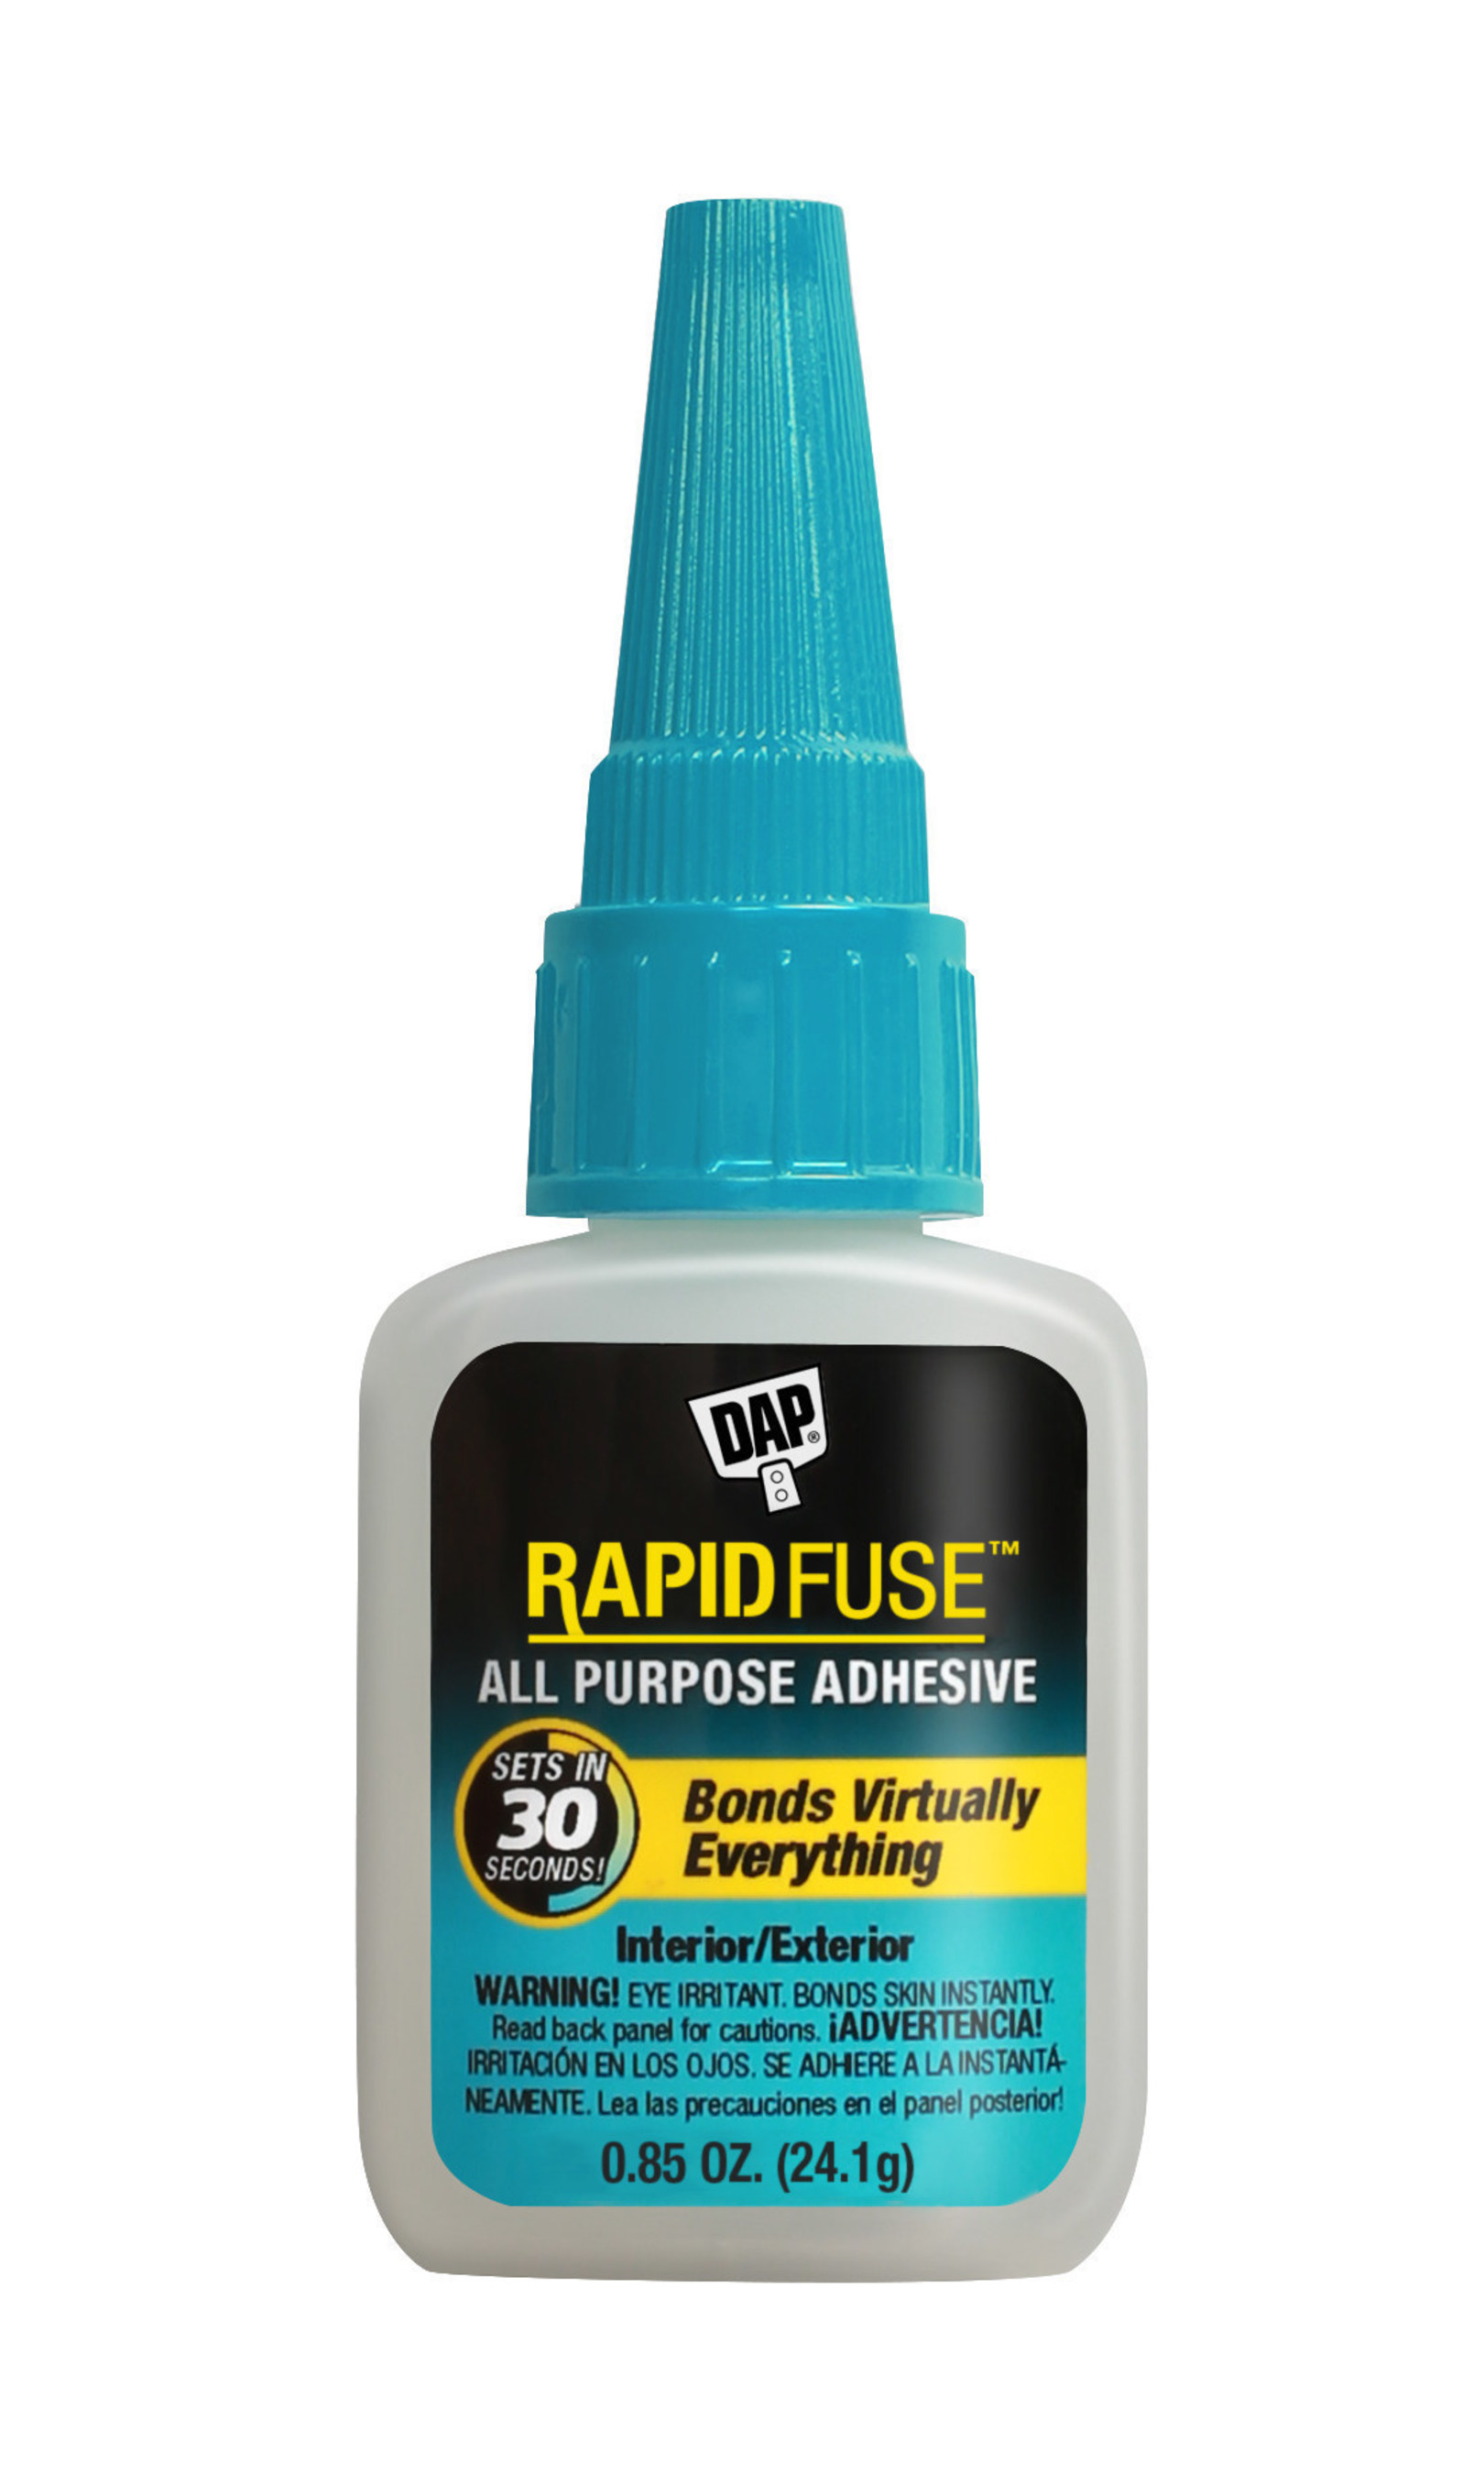 DAP RapidFuse All Purpose Adhesive bonds virtually everything to anything and offers the best end result on home repairs and DIY projects alike.